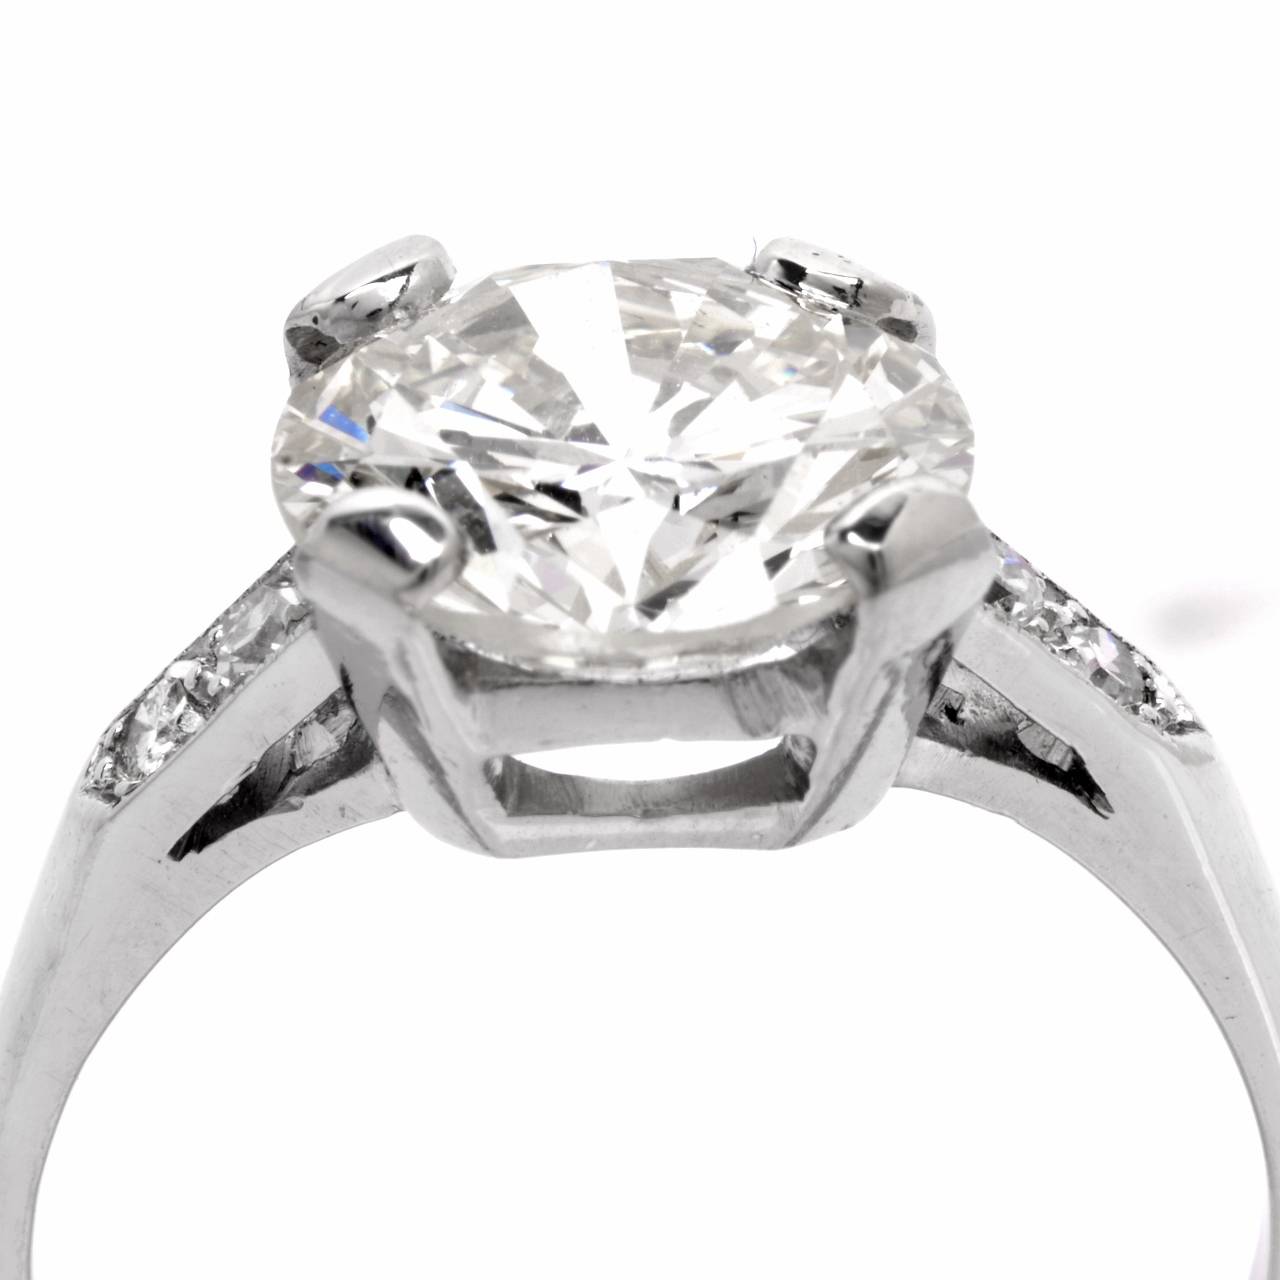 This diamond engagement ring is crafted in platinum, weighing 4.9 grams. This authentic vintage engagement ring exposes an outstanding 3.49 ct  round-faceted diamond graded  J-K  color and VS clarity, mounted within a basket-shaped openwork setting.